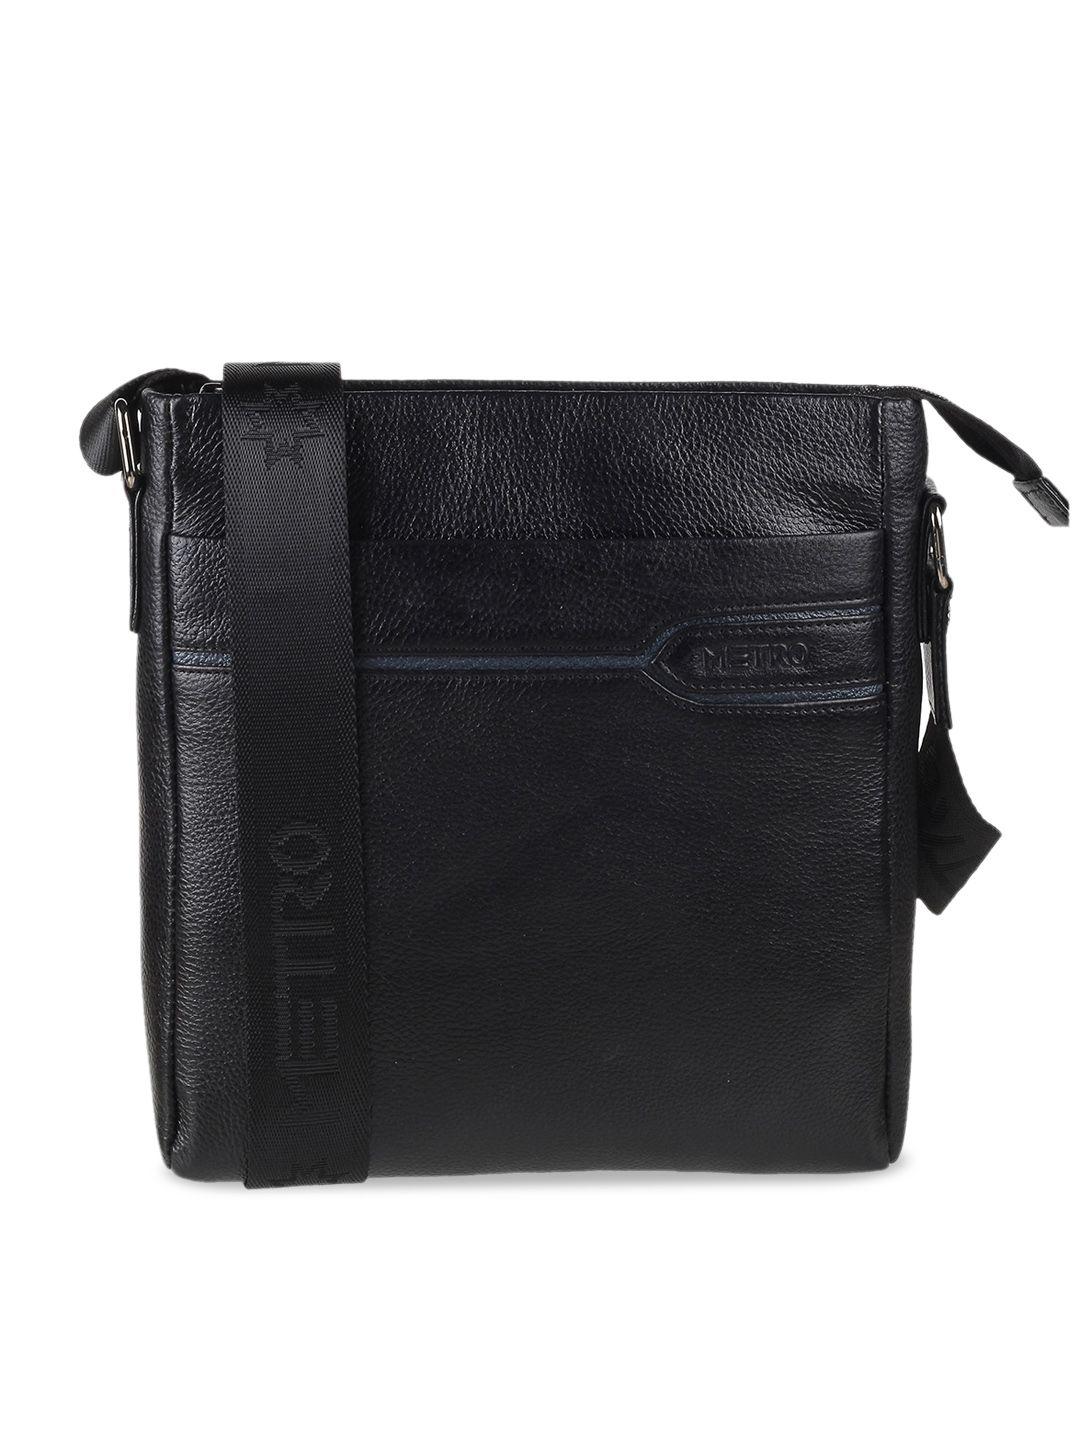 metro textured structured sling bag